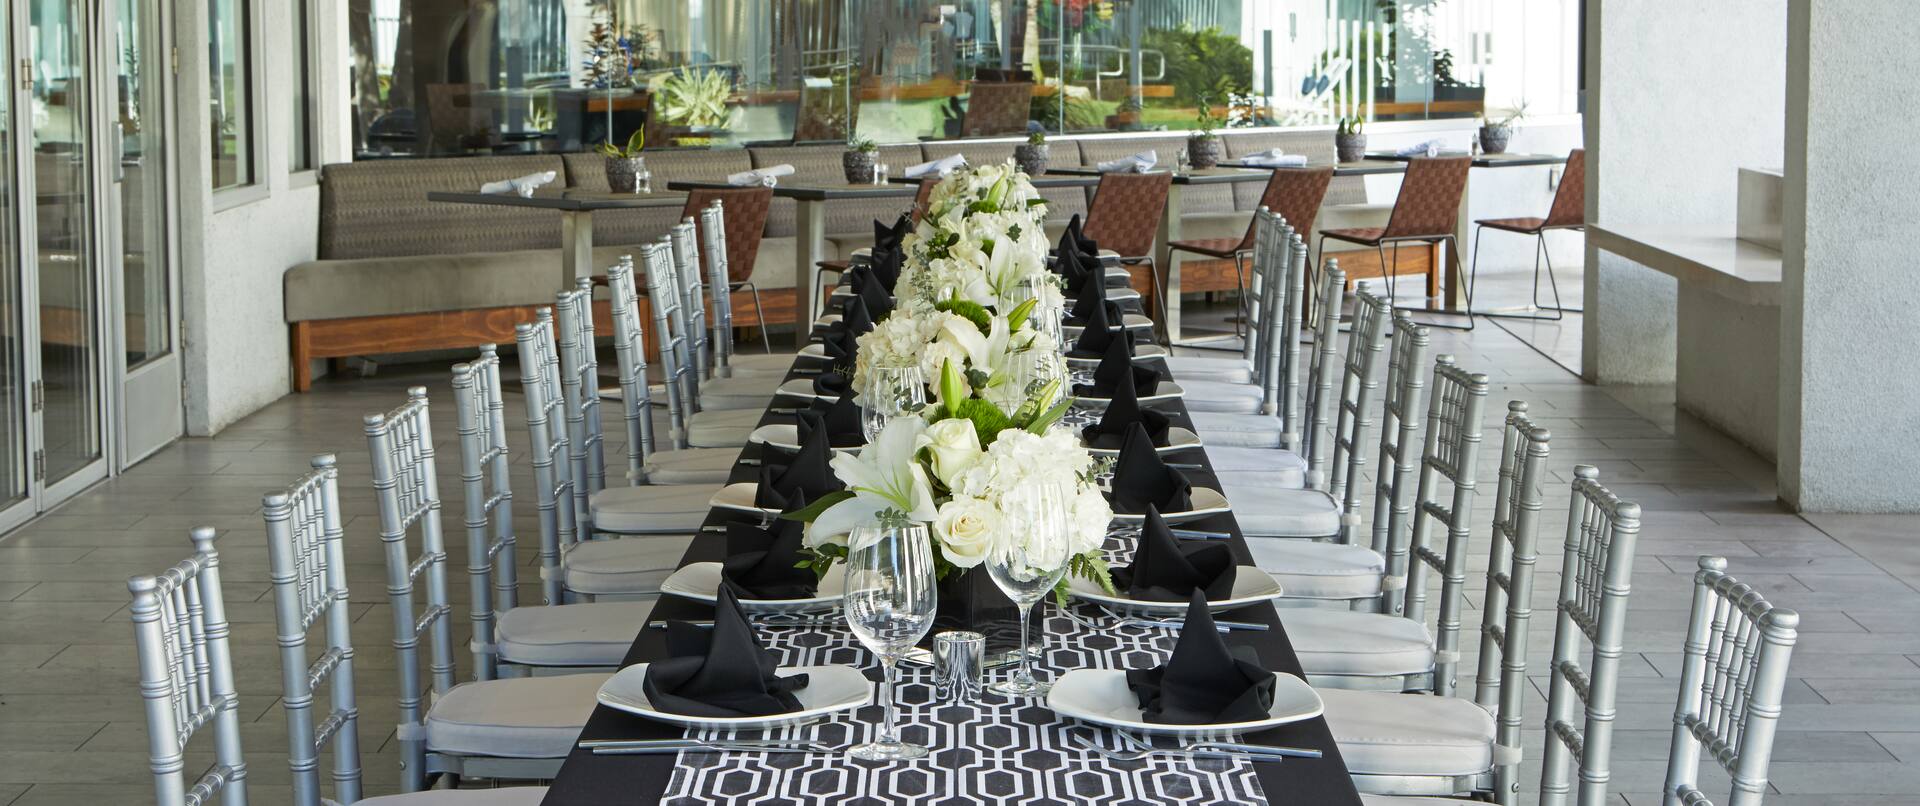 Marina del Rey Event Space Hotel MdR A Doubletree by Hilton Hotel